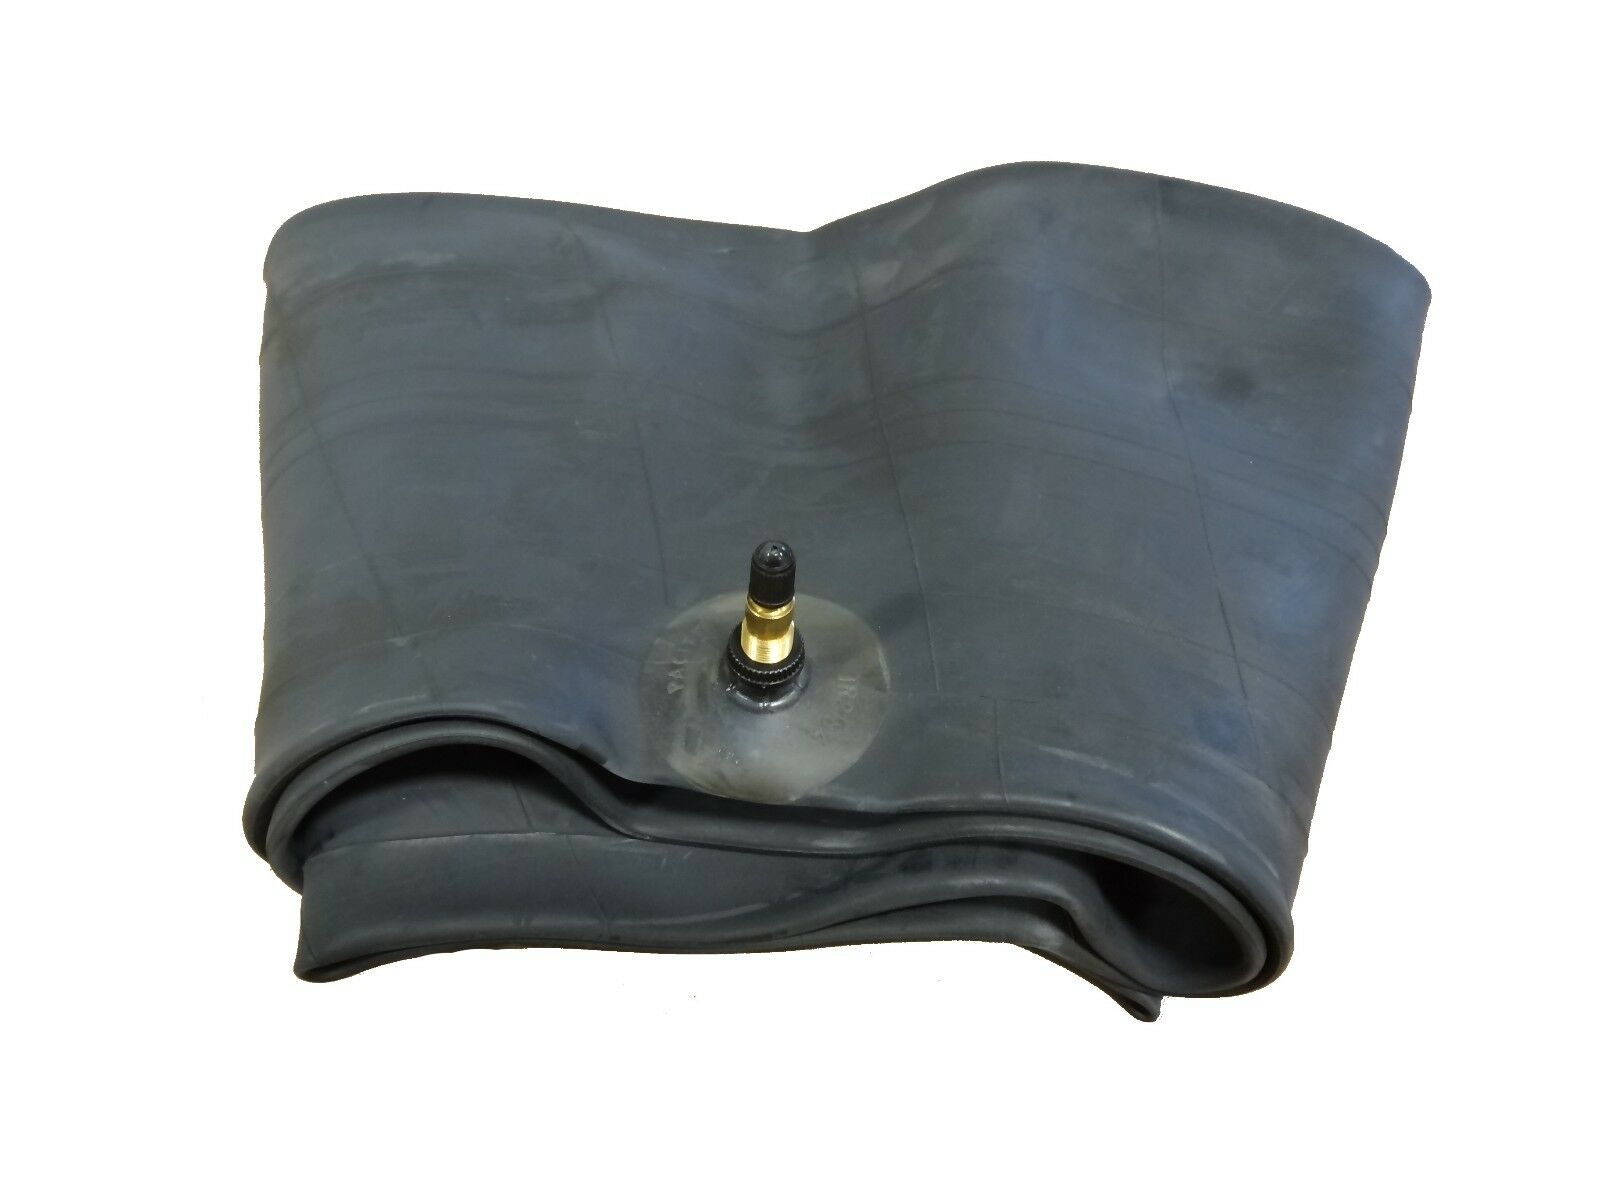 8.3-24 Farm Tractor Tire Inner Tube Also Fits 7-24, 7.5-24, 8-24, 9-24 & 9.5-24